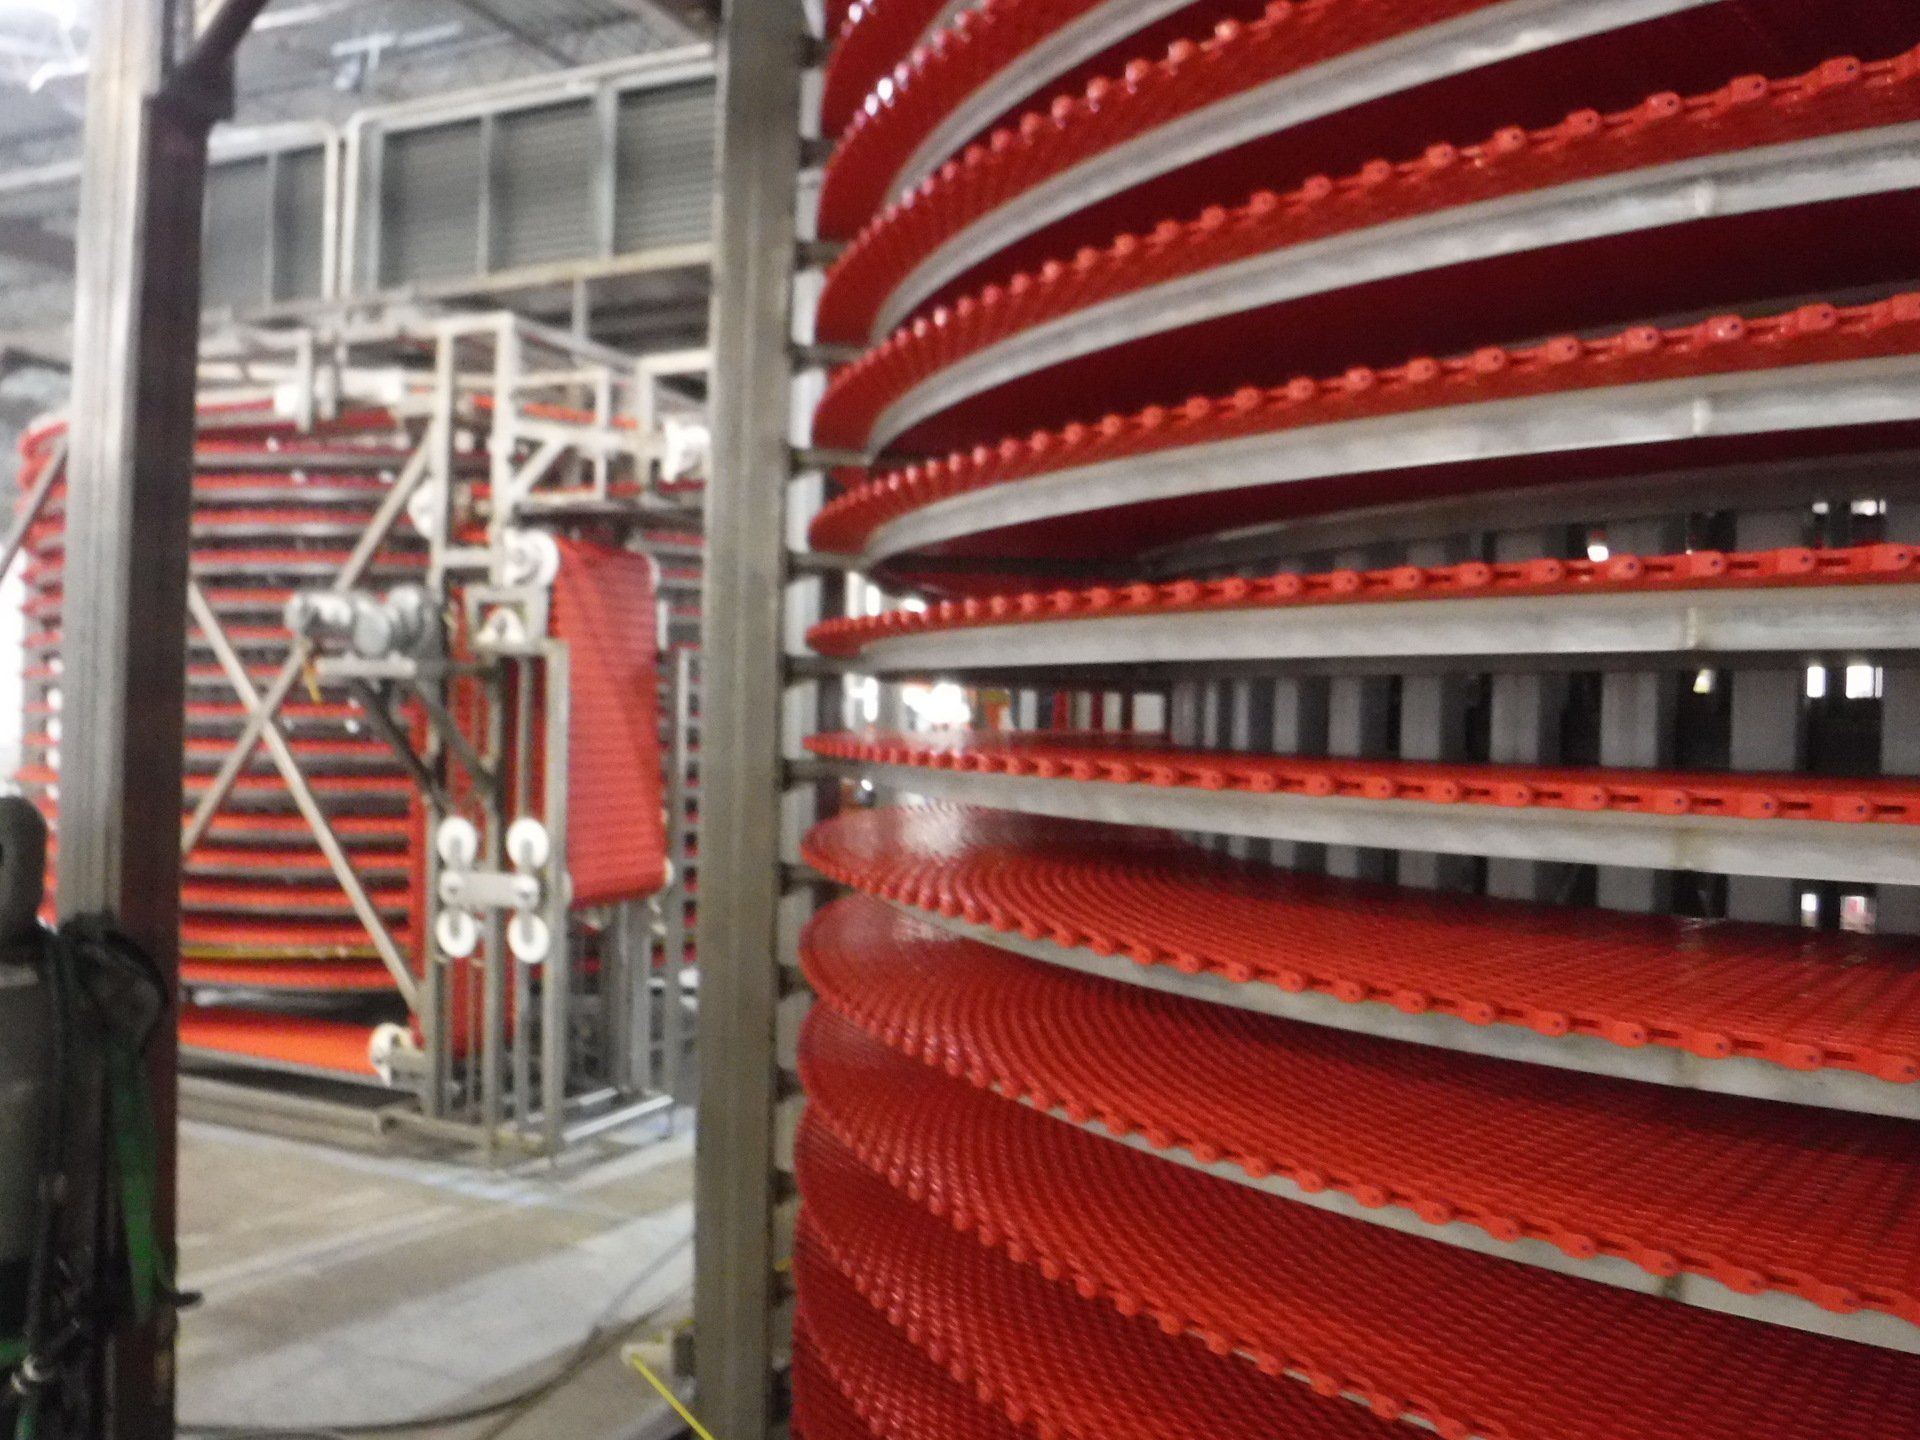 A red spiral conveyor belt is in a factory – USA - Regal Construction Inc.